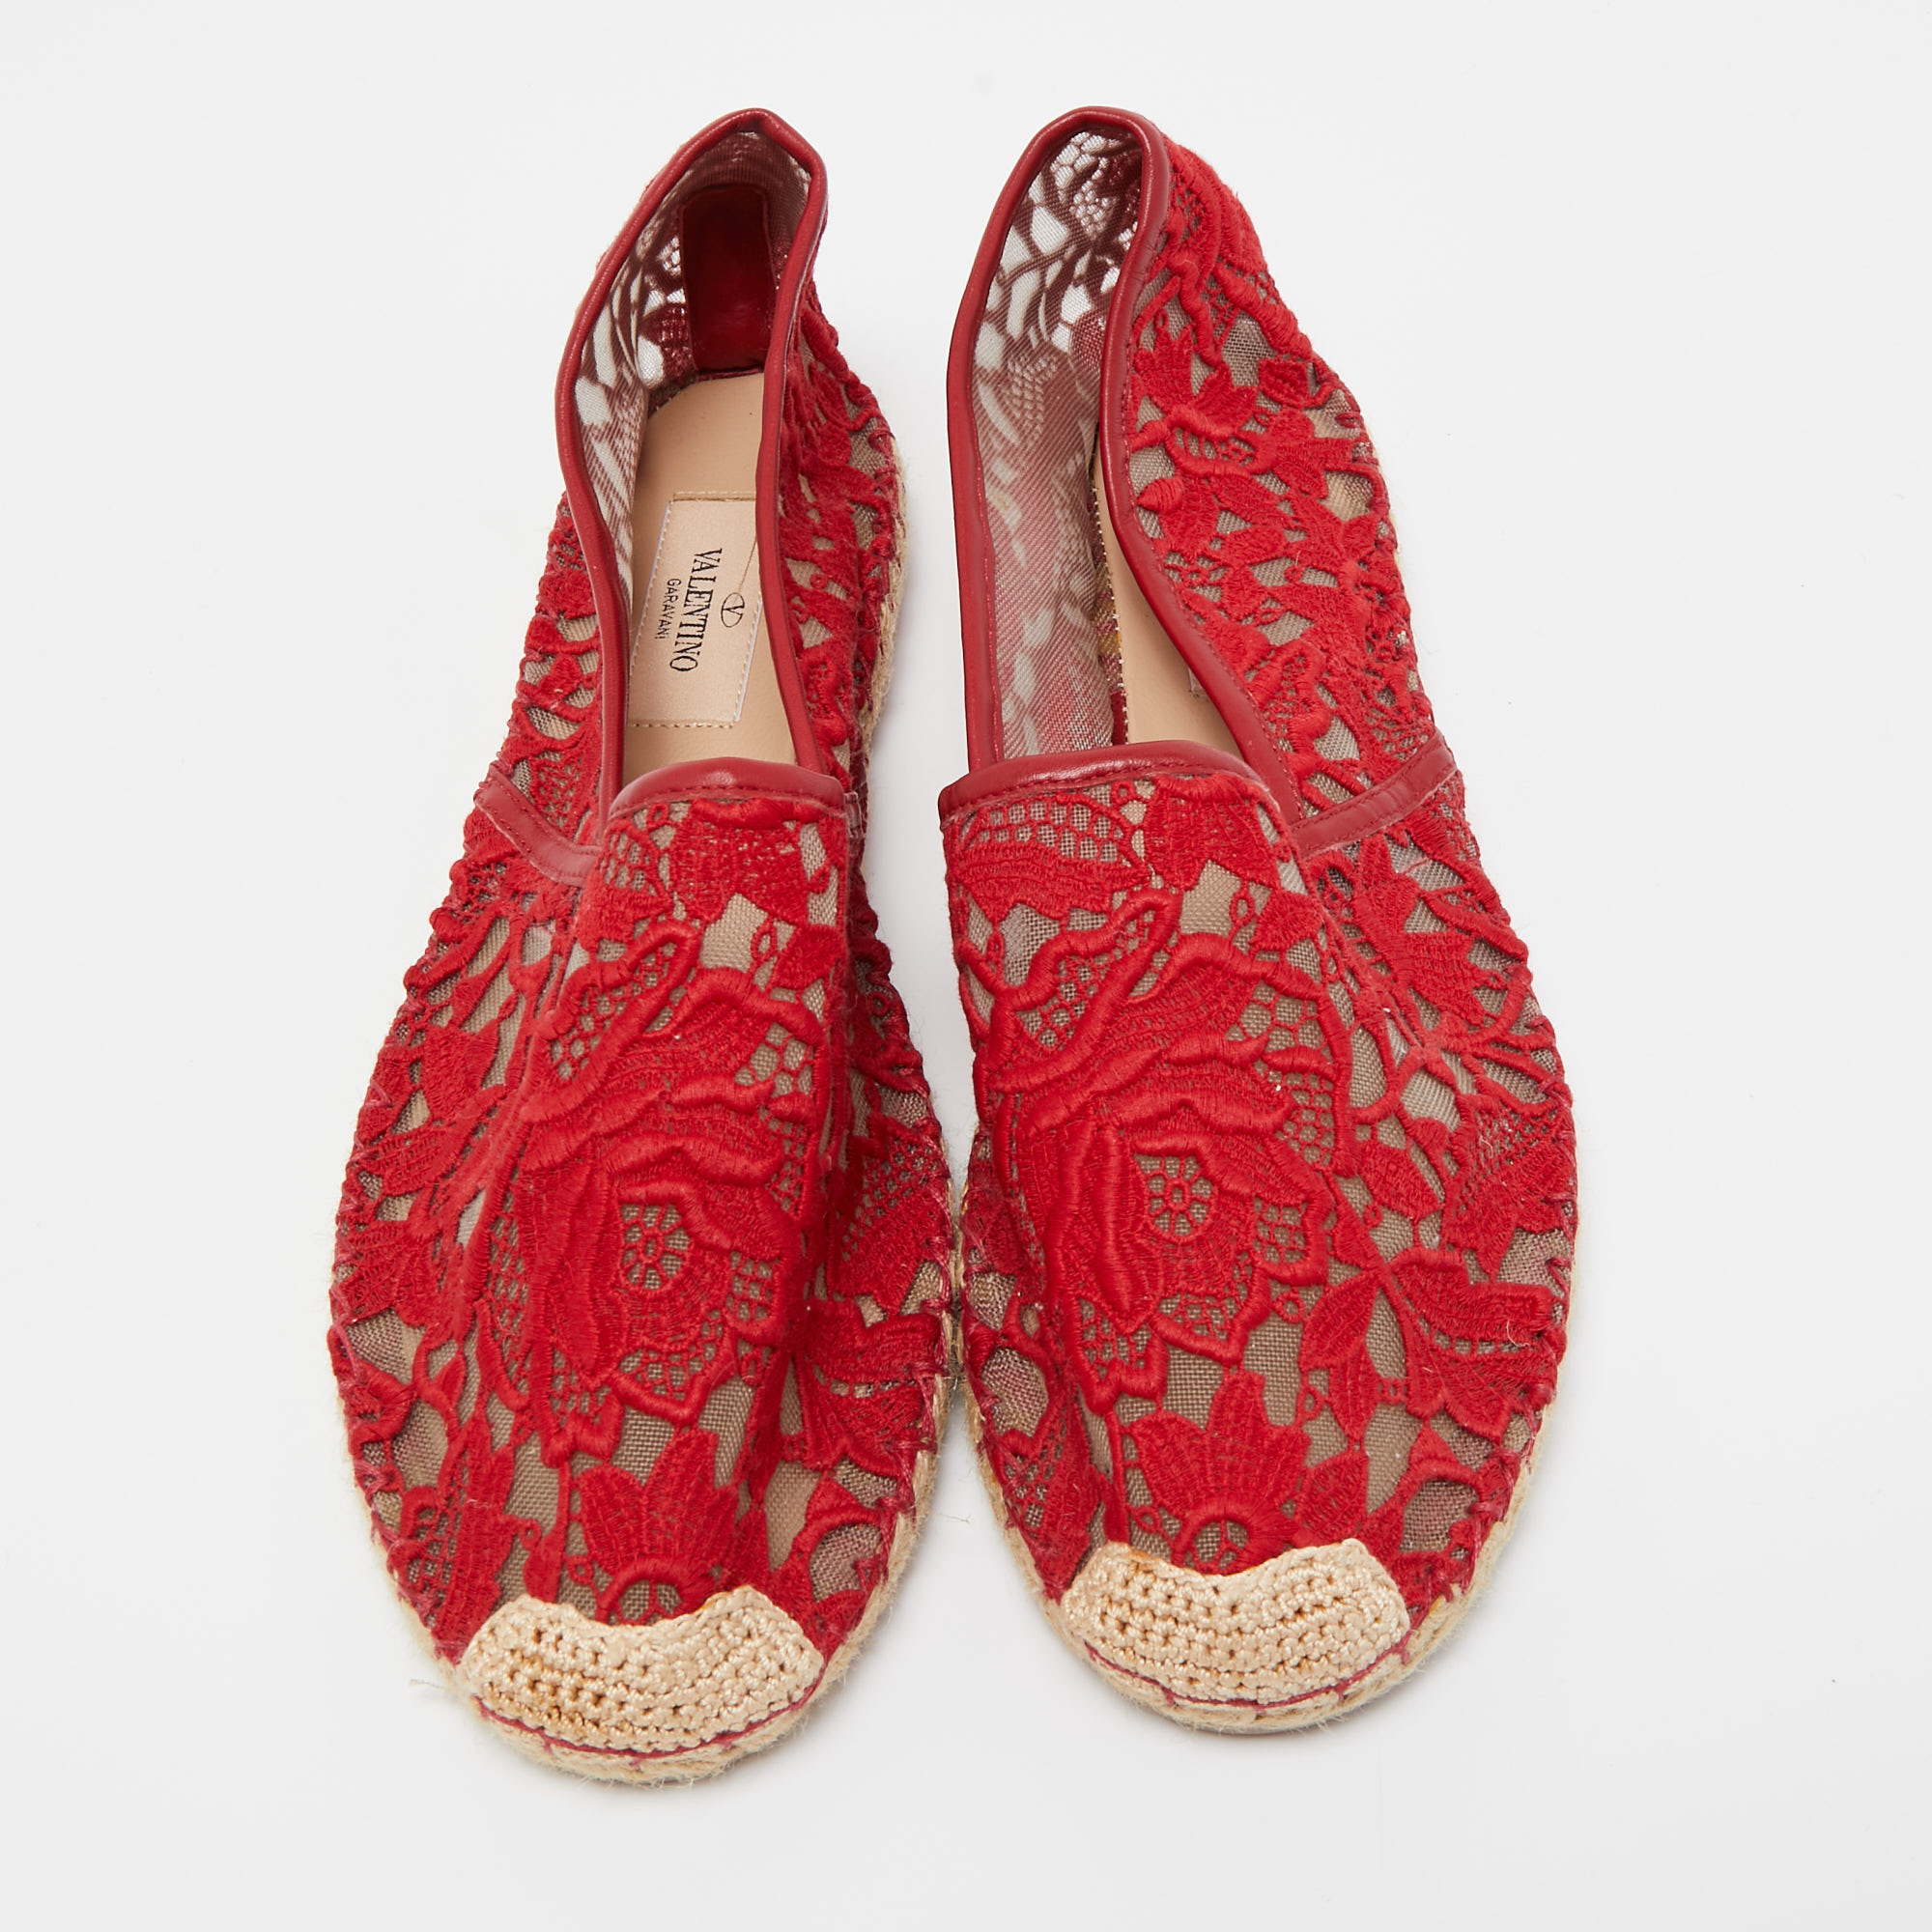 Valentino Red Floral Lace Espadrille Flats Size 39